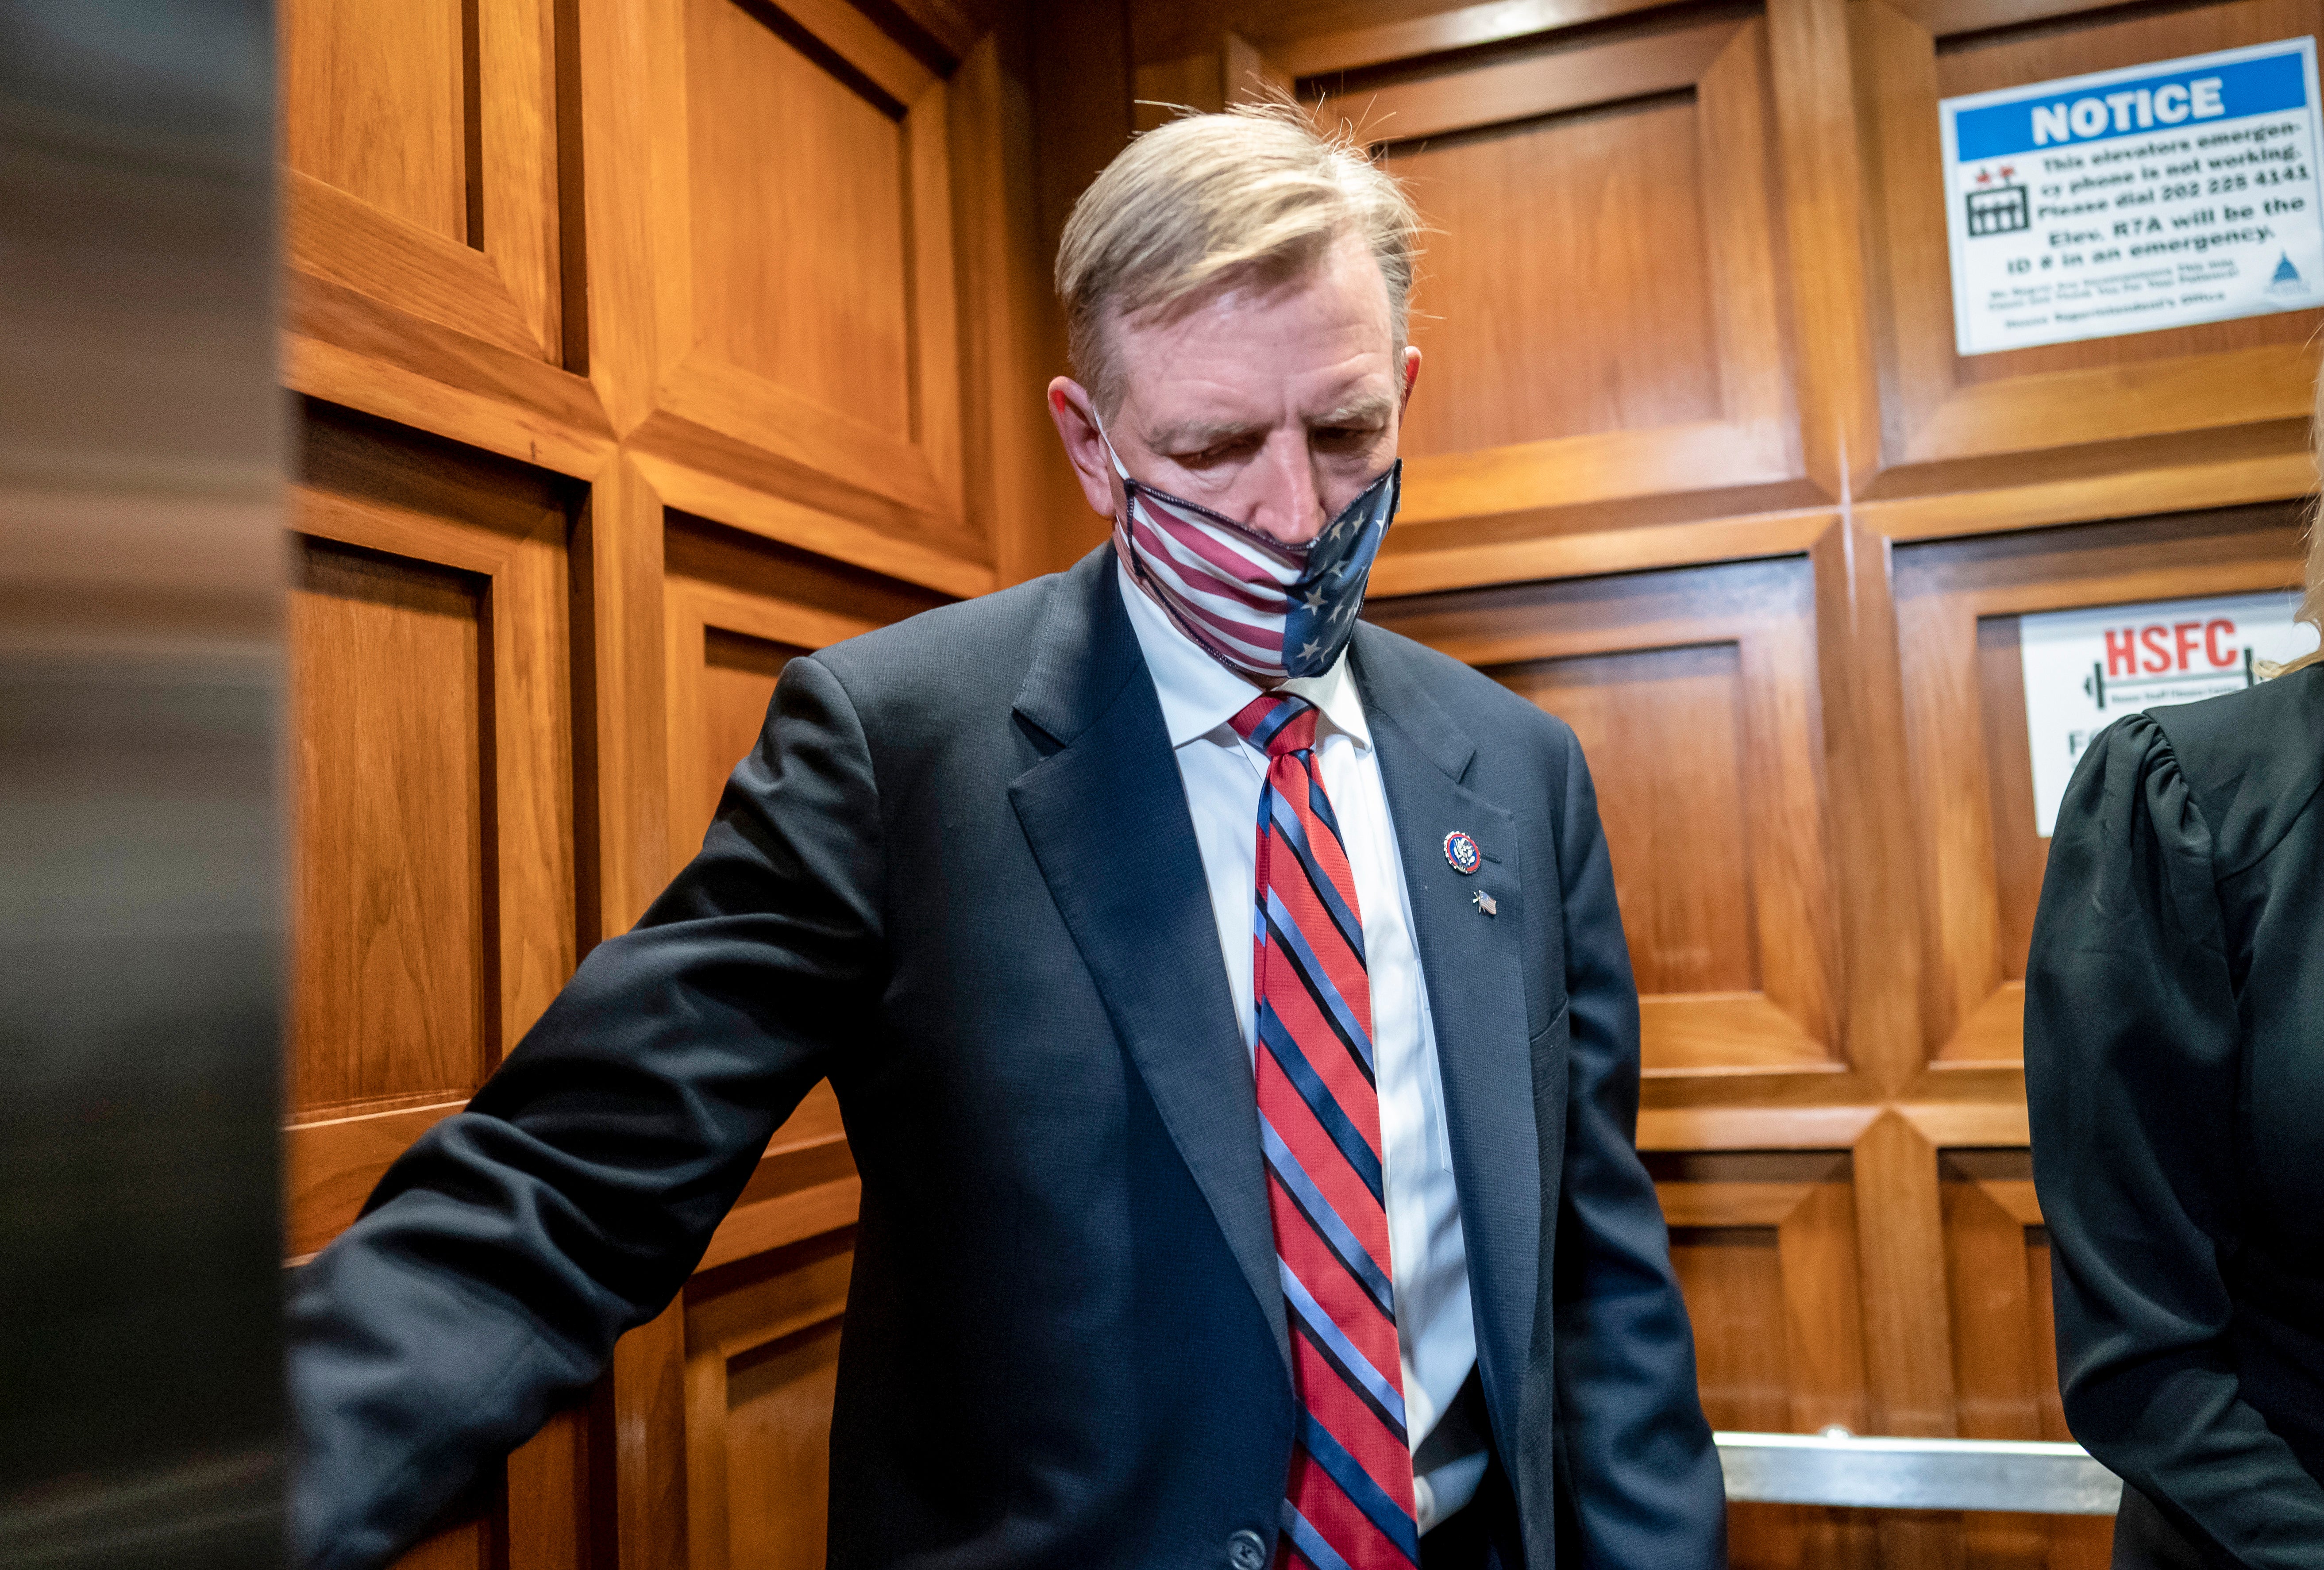 Rep. Paul Gosar, R-Ariz., takes an elevator as the House of Representatives prepares to vote on a resolution to formally rebuke him for tweeting an animated video that depicted him striking Rep. Alexandria Ocasio-Cortez, D-N.Y., with a sword, on Capitol Hill in Washington, Wednesday, Nov. 17, 2021. In addition to the official censure, House Democrats want to oust him from his seats on the House Oversight Committee and the Natural Resources Committee. (AP Photo/J. Scott Applewhite)